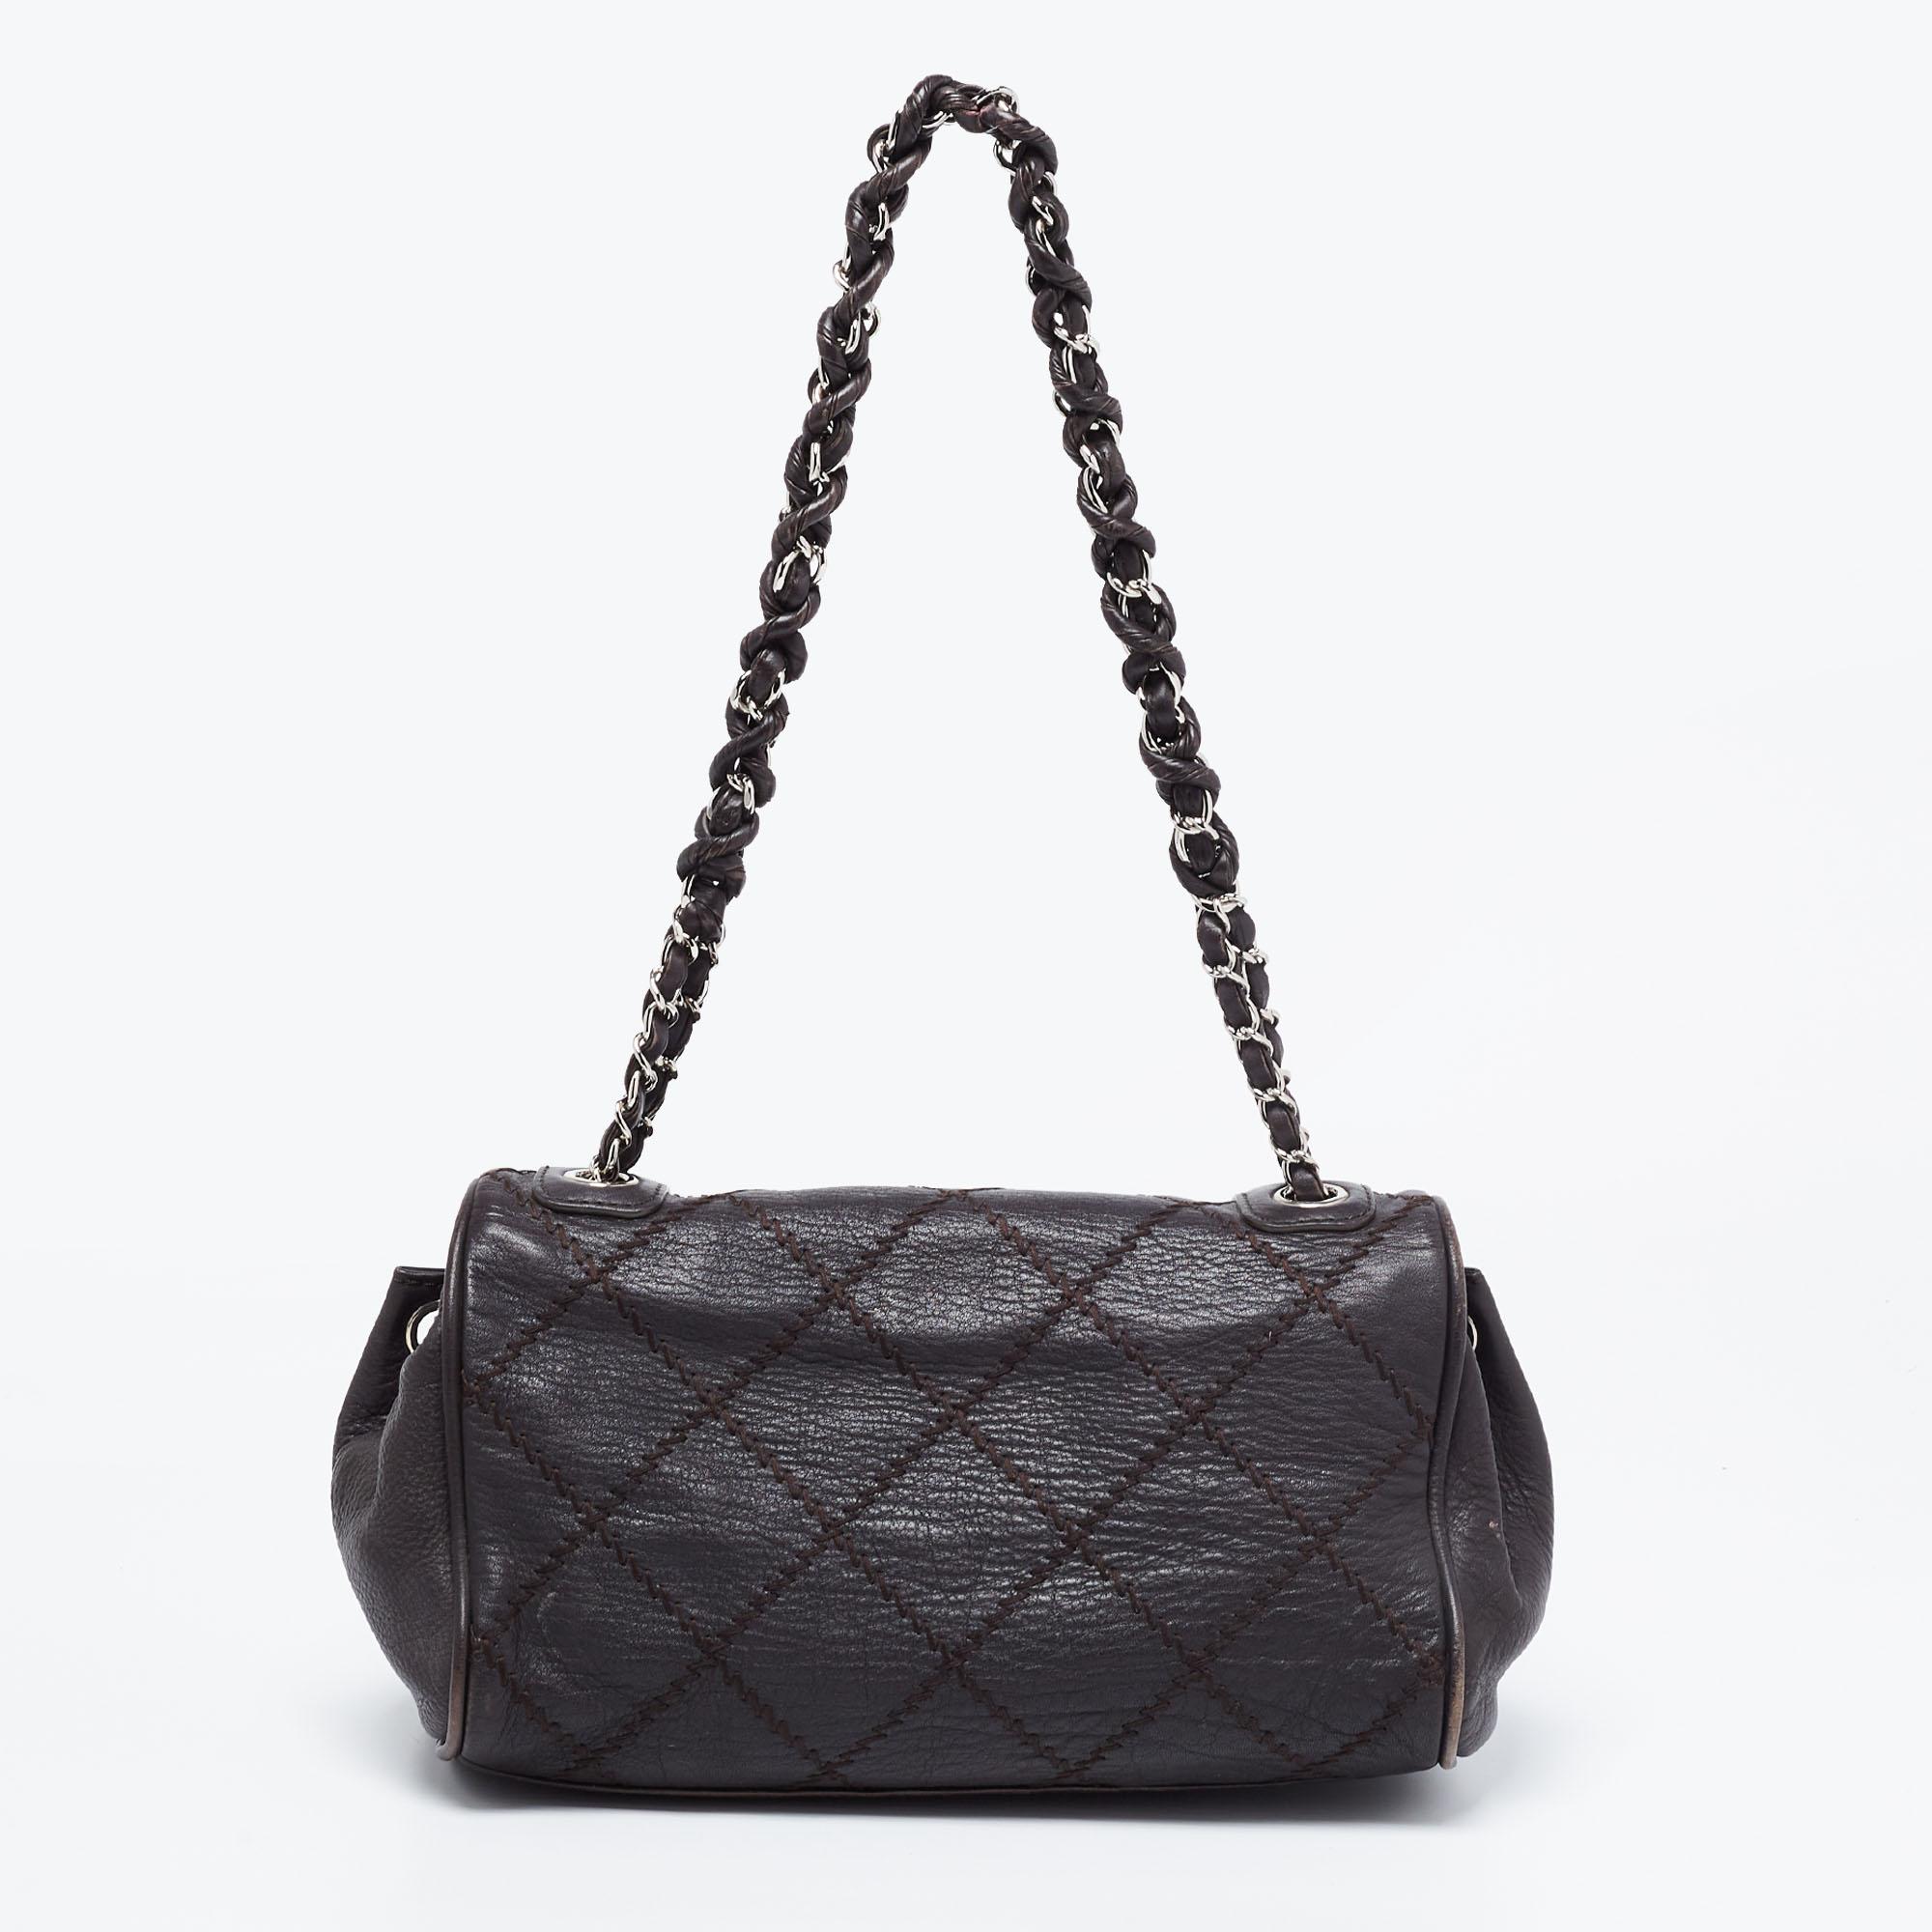 Delivering on Chanel's heritage of excellence, this Ultimate Stitch bag arrives in a classic design. Crafted from black leather, the shoulder bag features the diamond quilt and an interwoven handle. The lined interior is sized to be perfect for